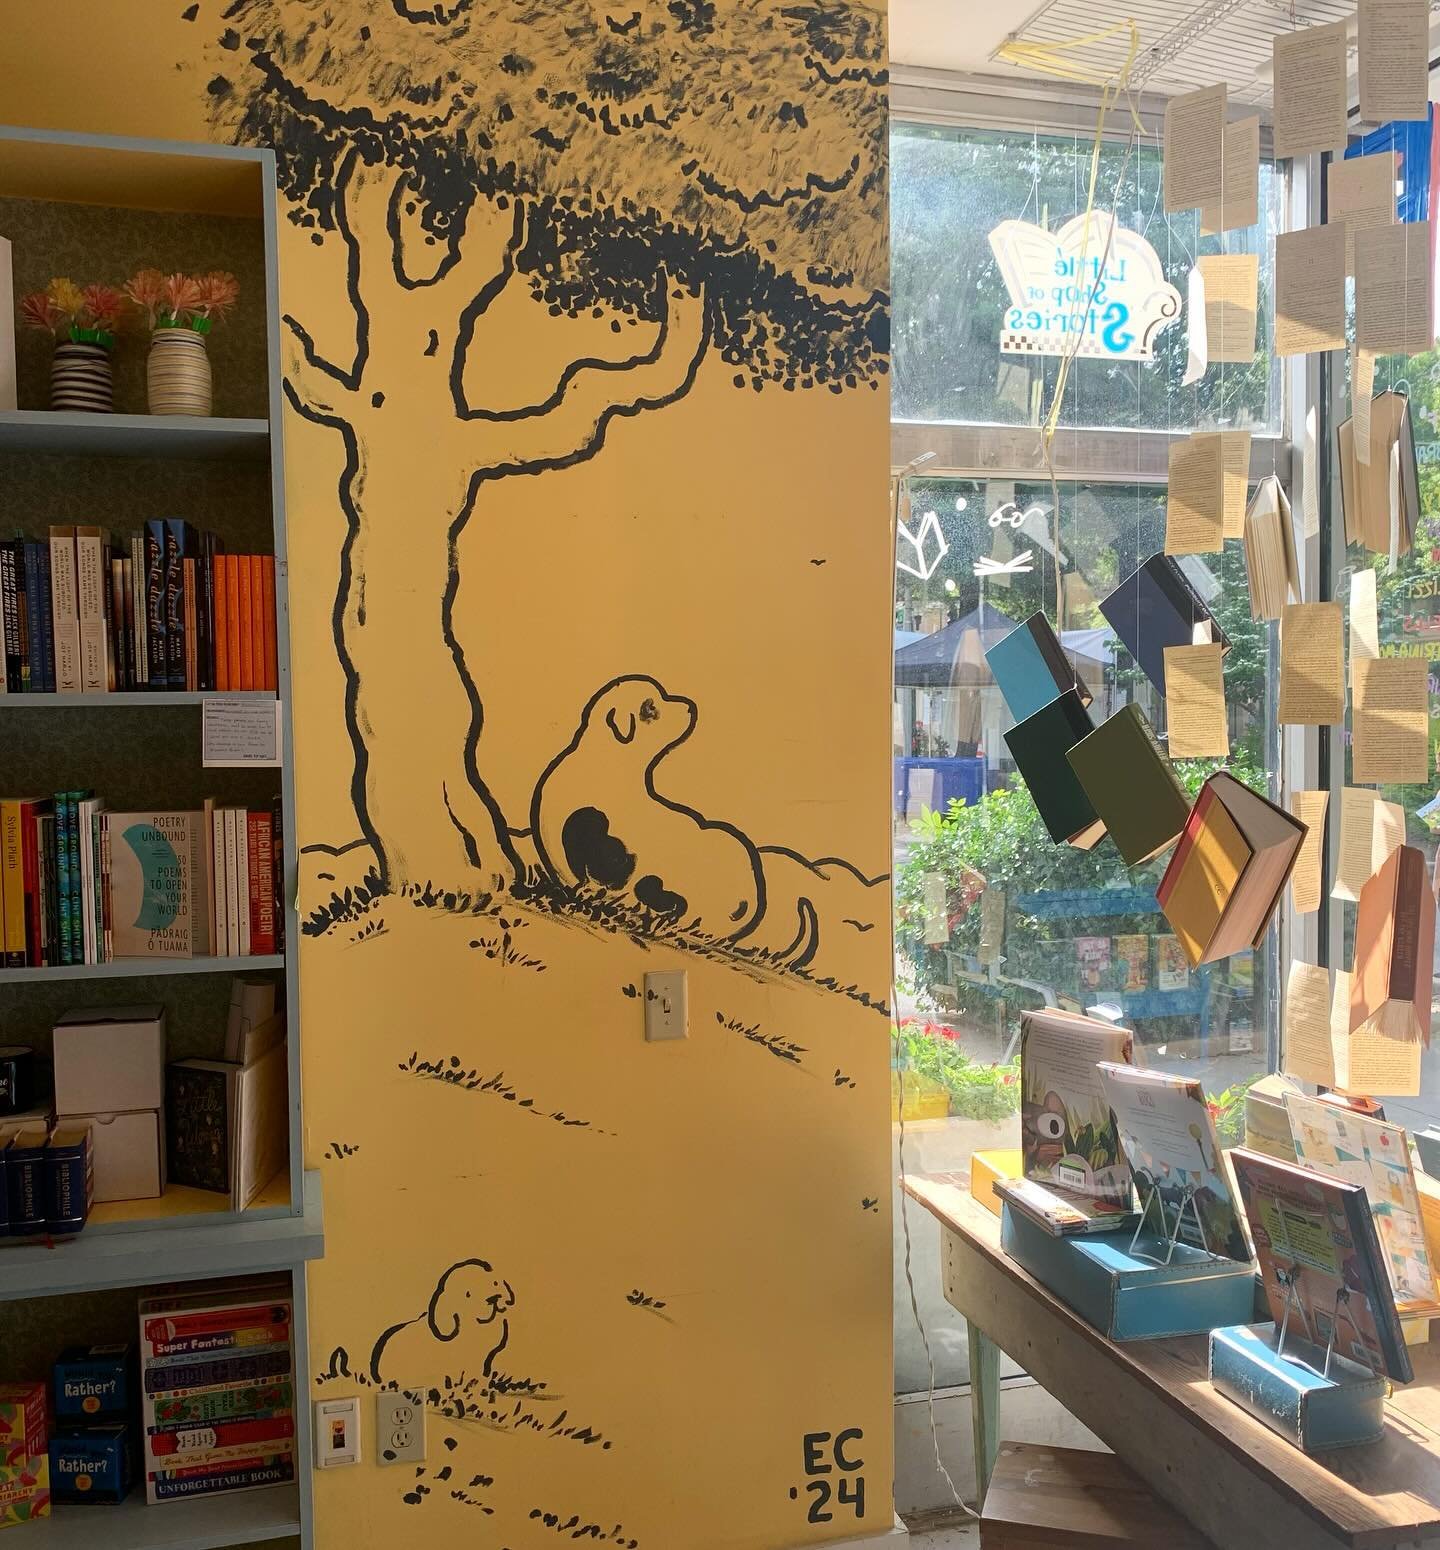 I painted this mural at Georgia bookstore over the weekend. 
Thank you @littleshopofstories for letting me tag your wall! That was quite spontaneous of you all!! 
A quick run to Ace Hardware for paints &amp; brushes, a clever decision to put bookstor